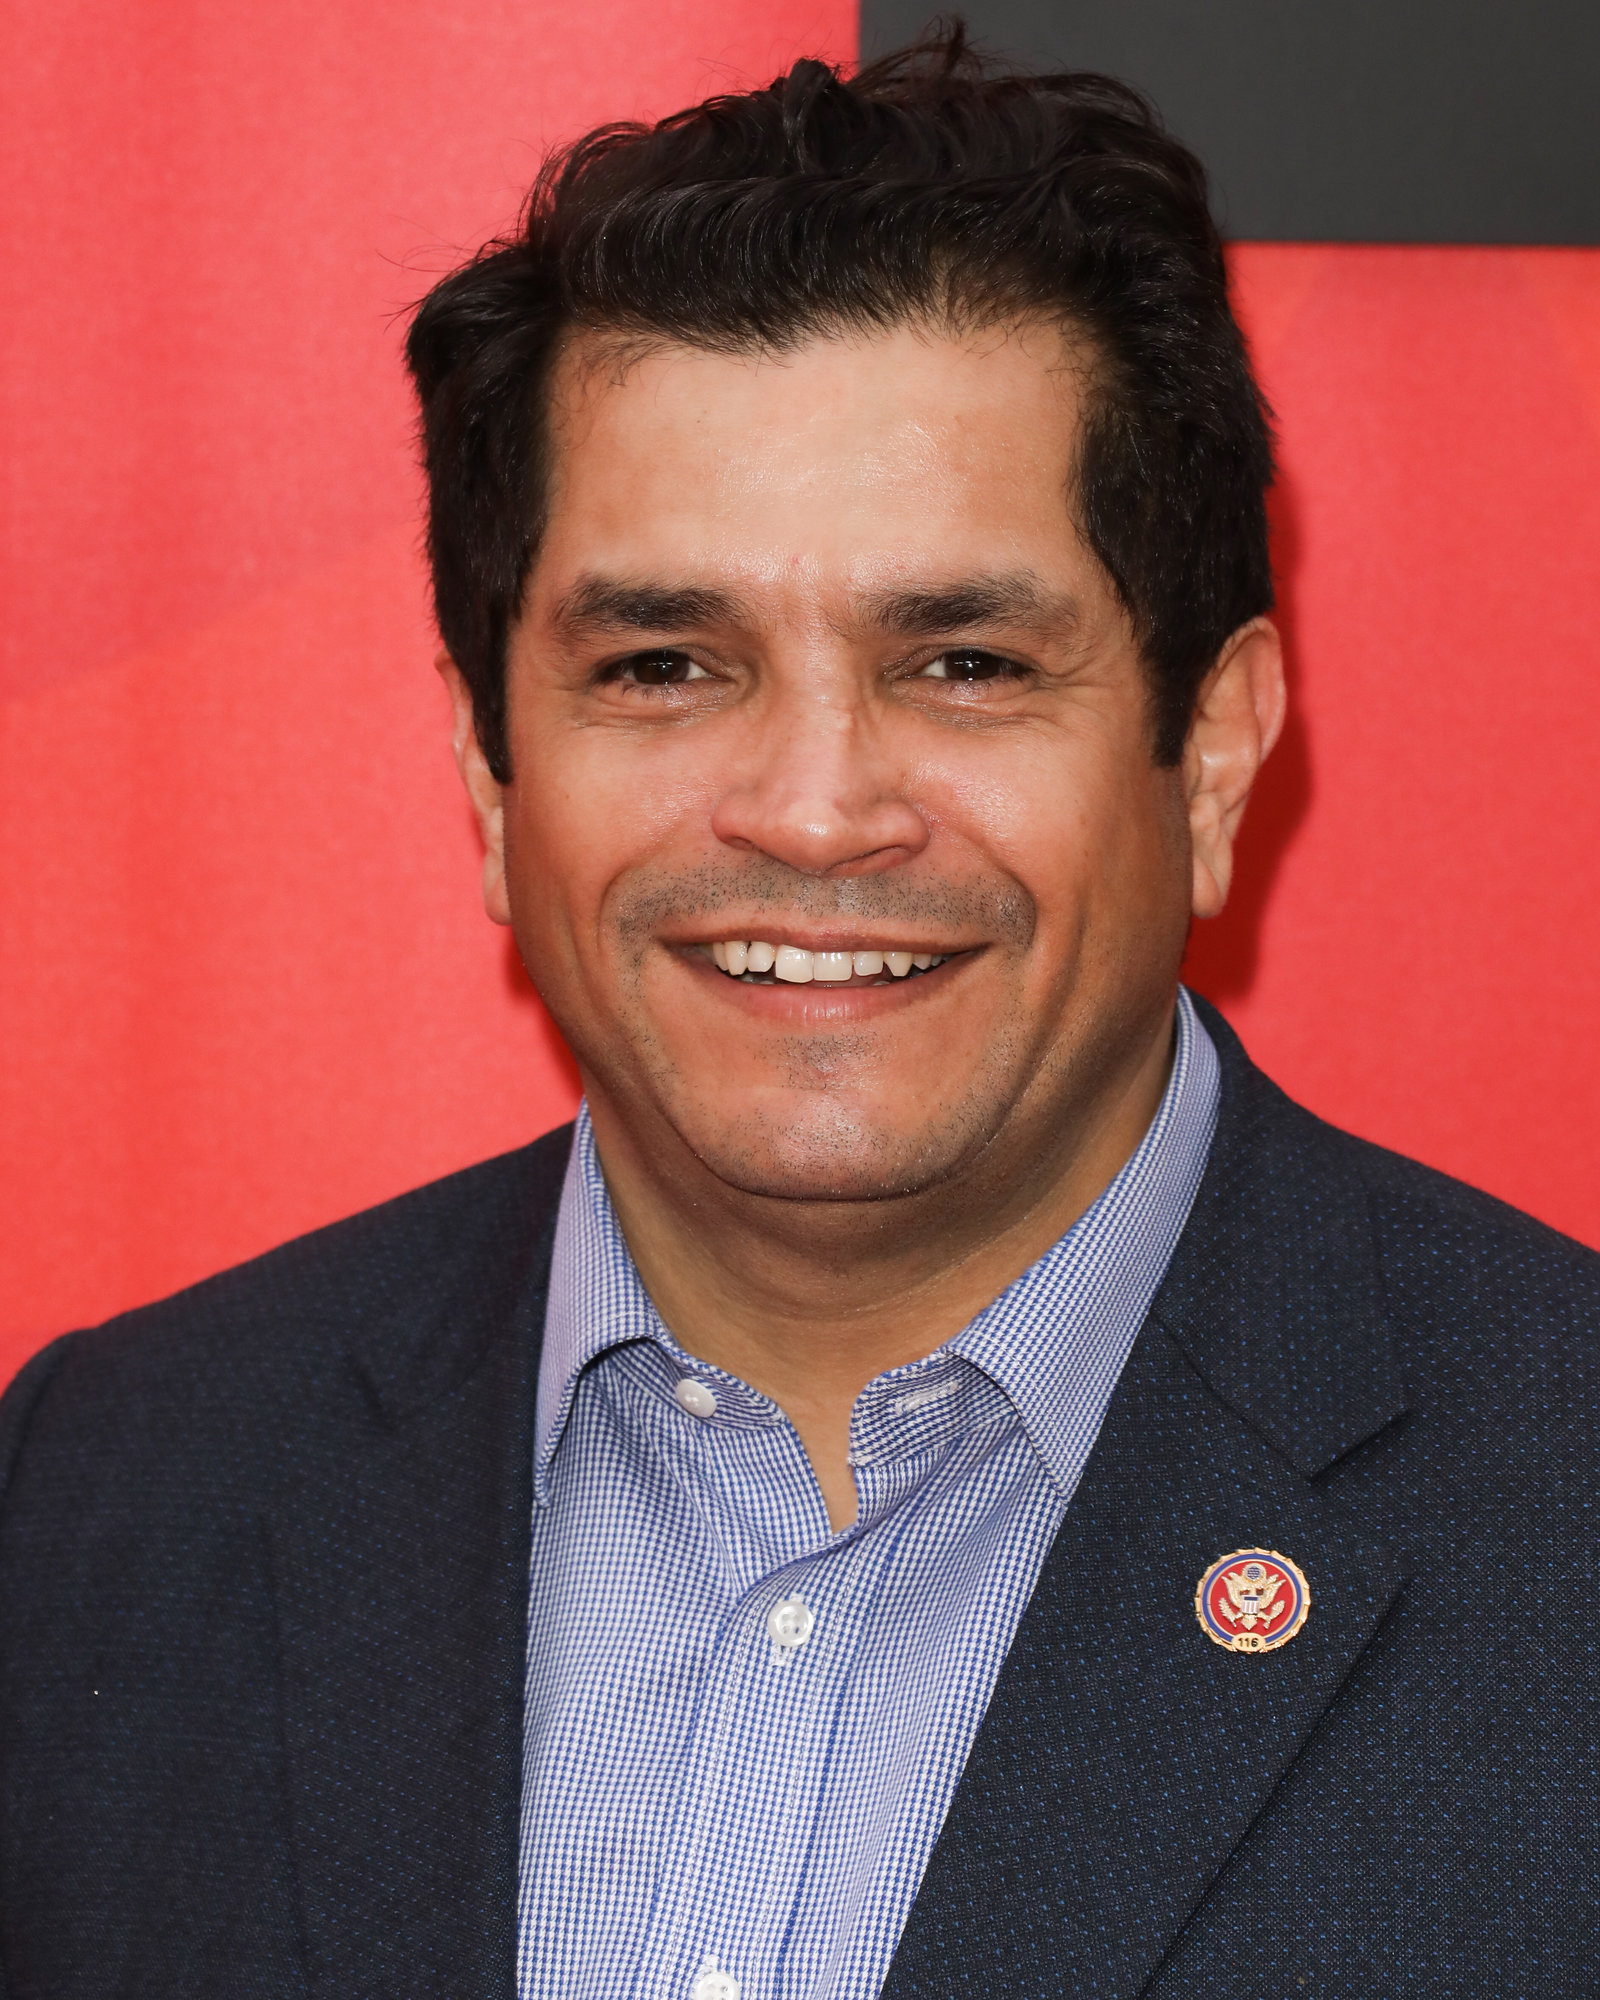 LOS ANGELES, CALIFORNIA - MAY 18: Congressman Jimmy Gomez attends the Smithsonian's celebration of Asian Pacific Americans at City Market Social House on May 18, 2019 in Los Angeles, California. (Photo by Paul Archuleta/Getty Images)